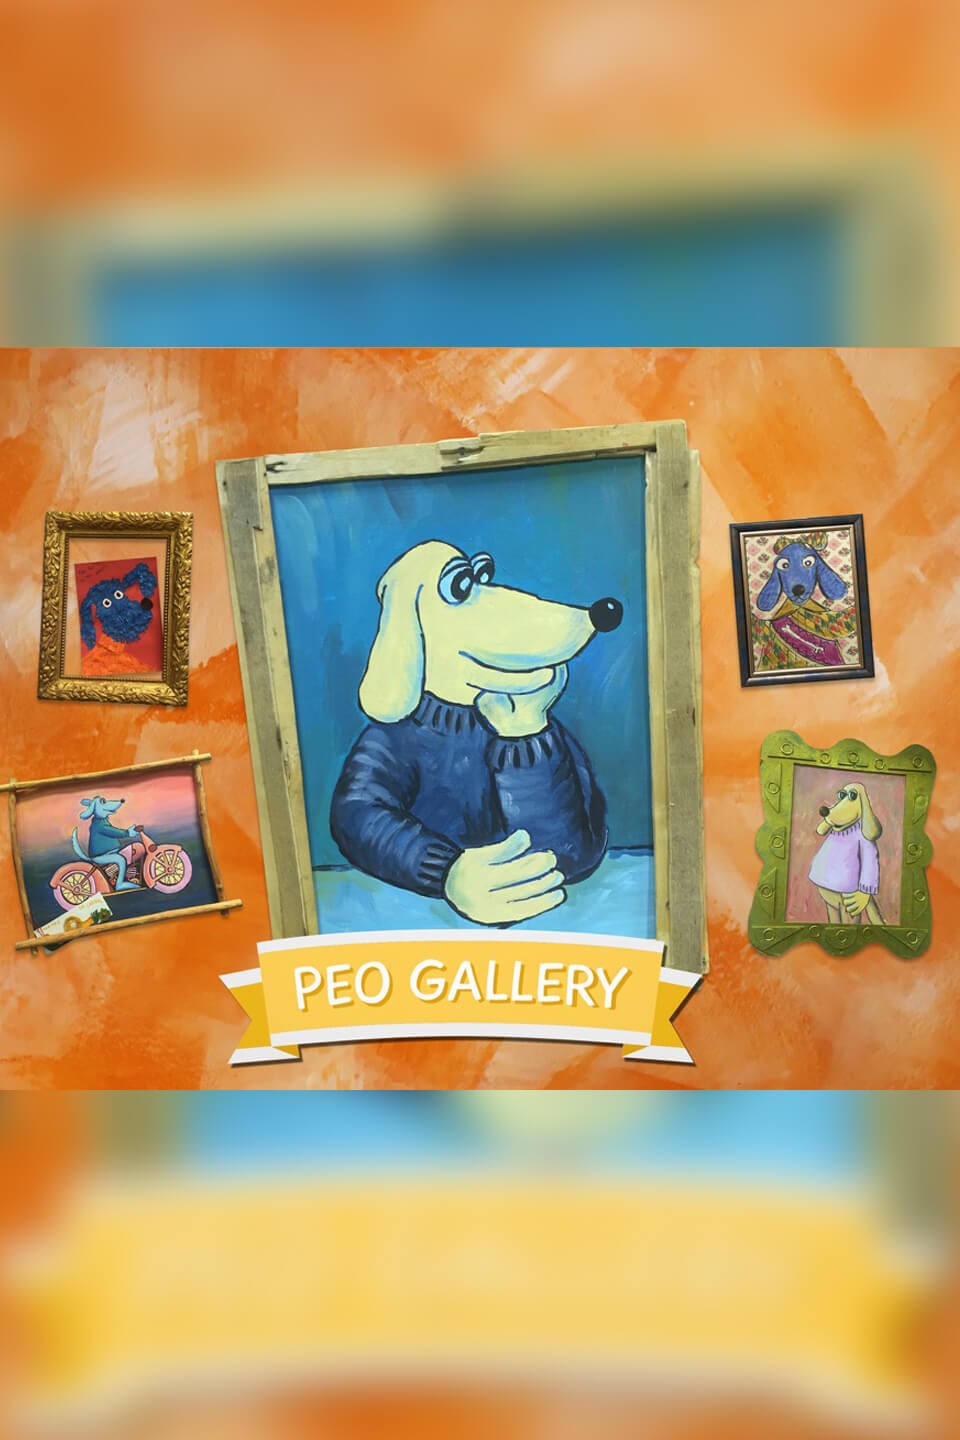 TV ratings for Peo Gallery in Colombia. Amazon Prime Video TV series